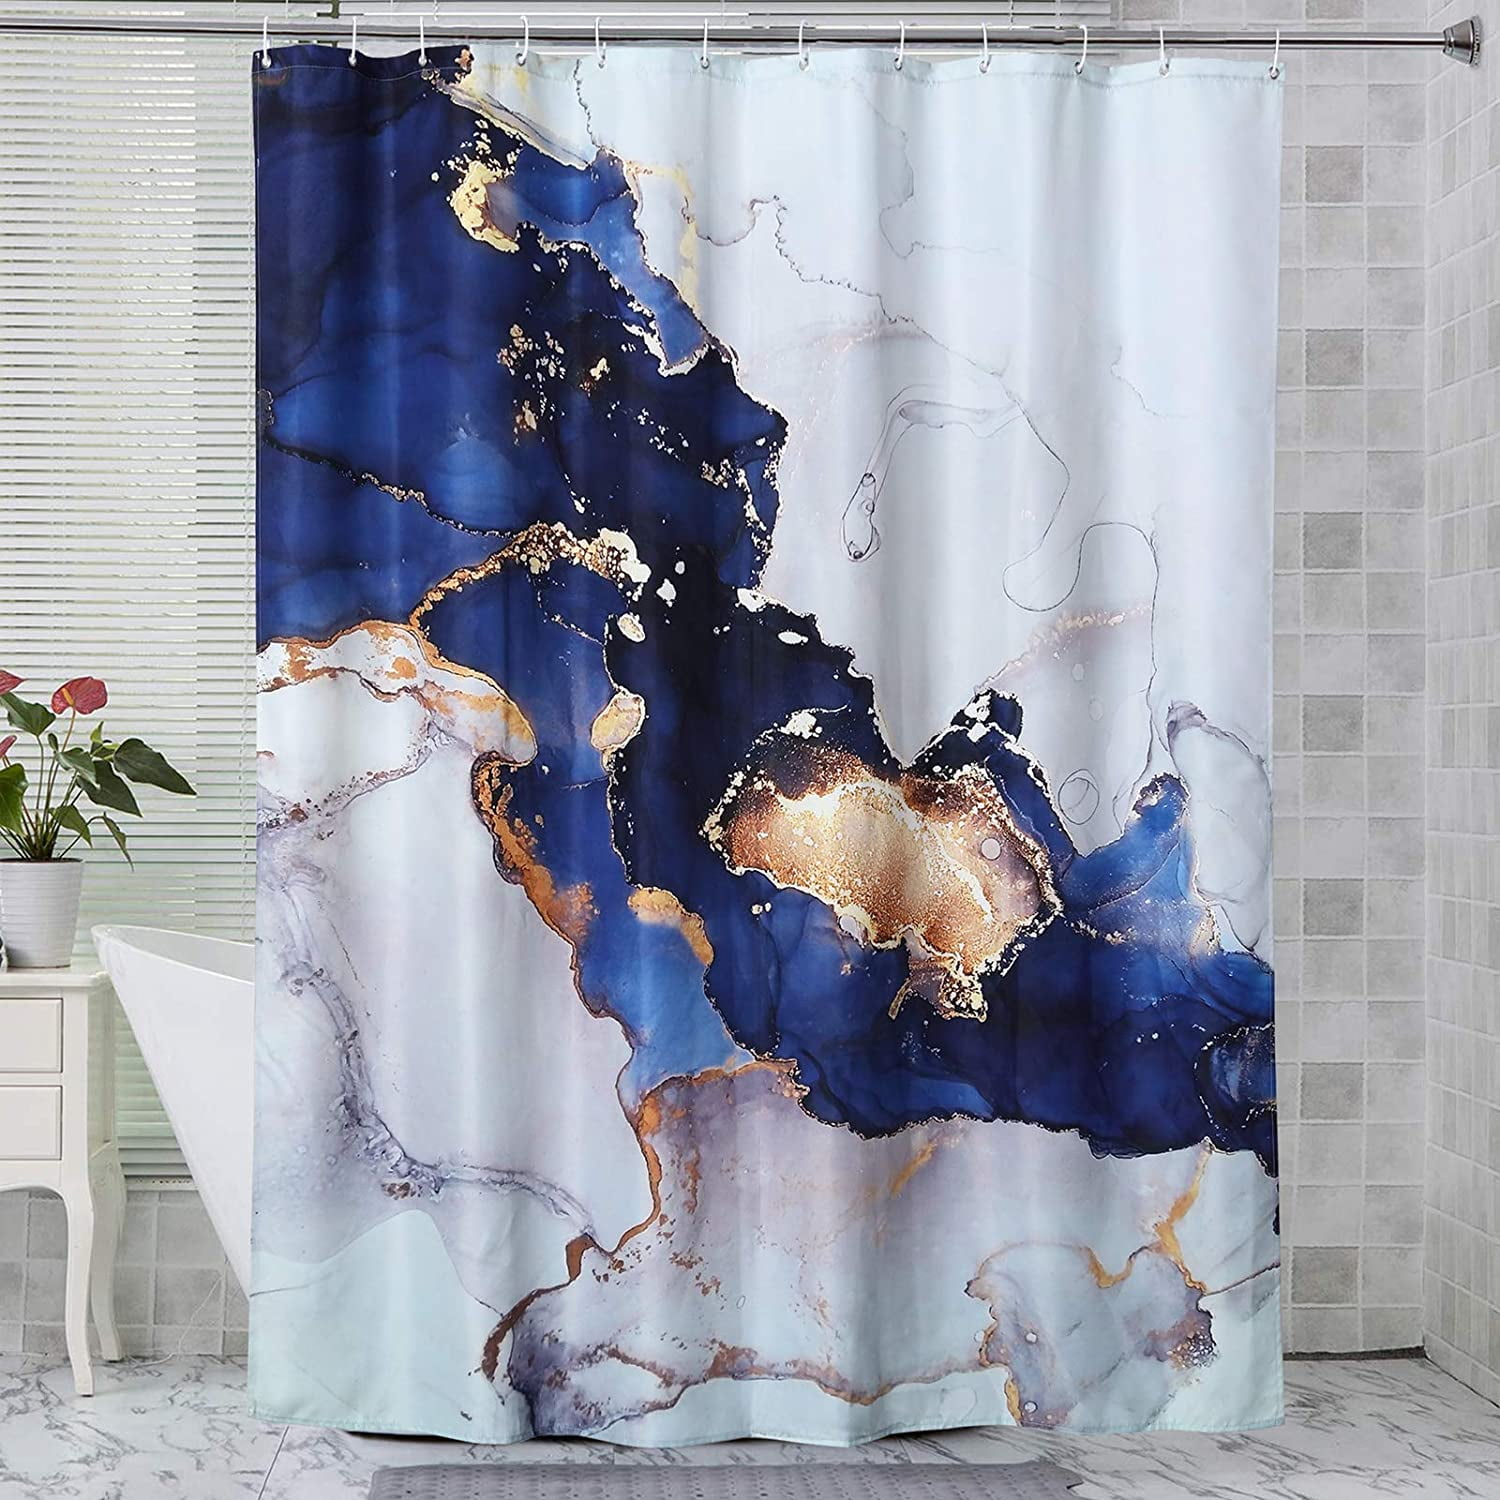 Marble Ink Texture Background Fabric Shower Curtain Set Waterproof Fabric Hooks 